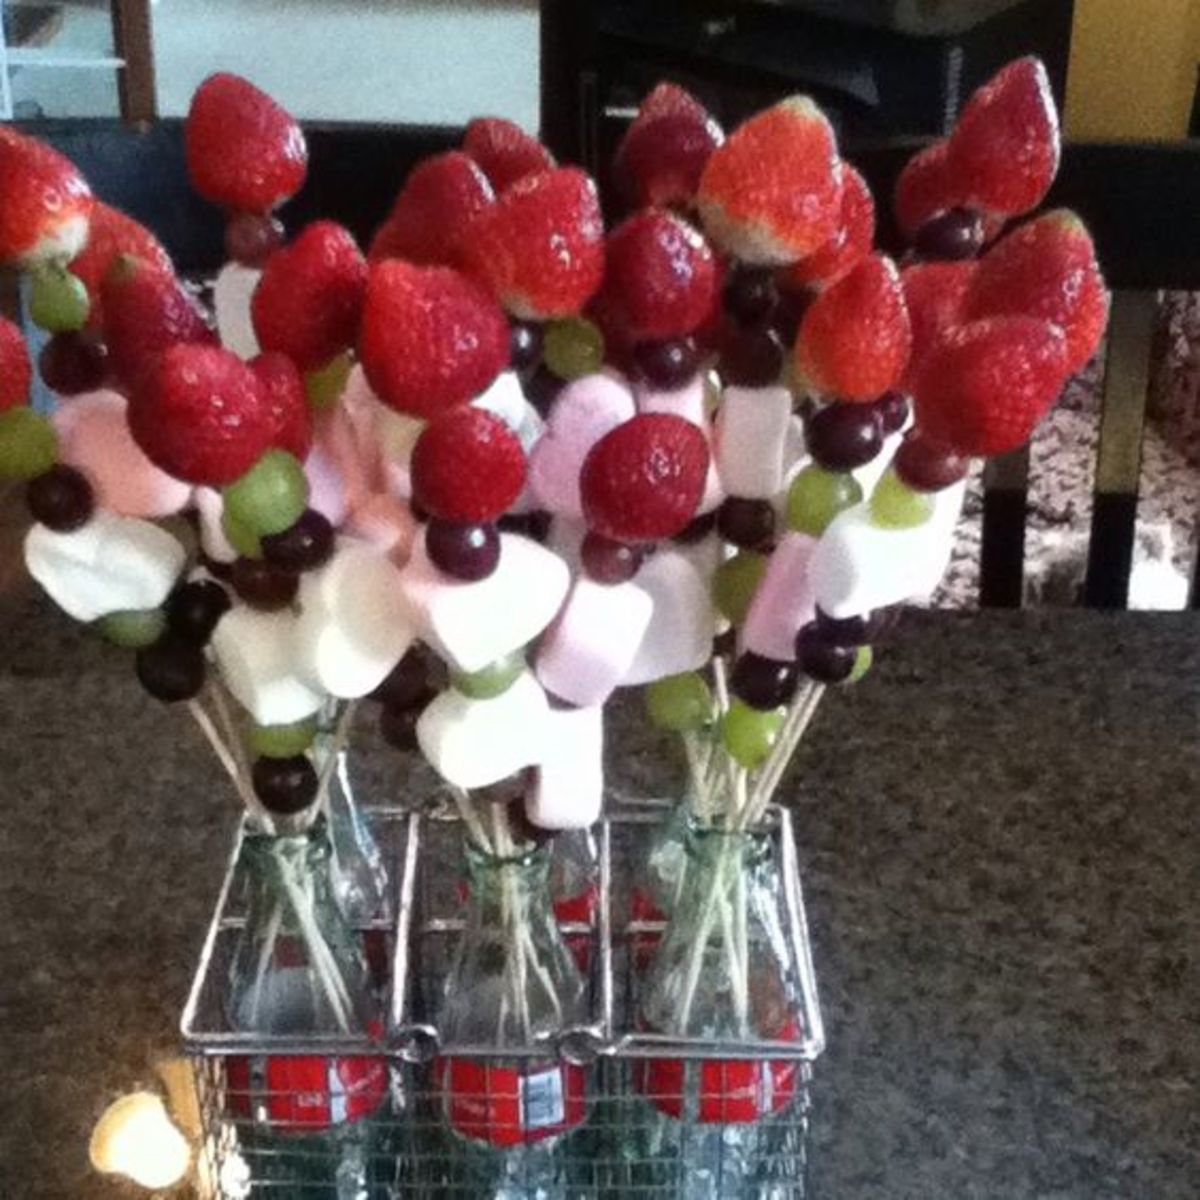 Valentine fruit kabobs. Use heart shaped marsh mellows in between.